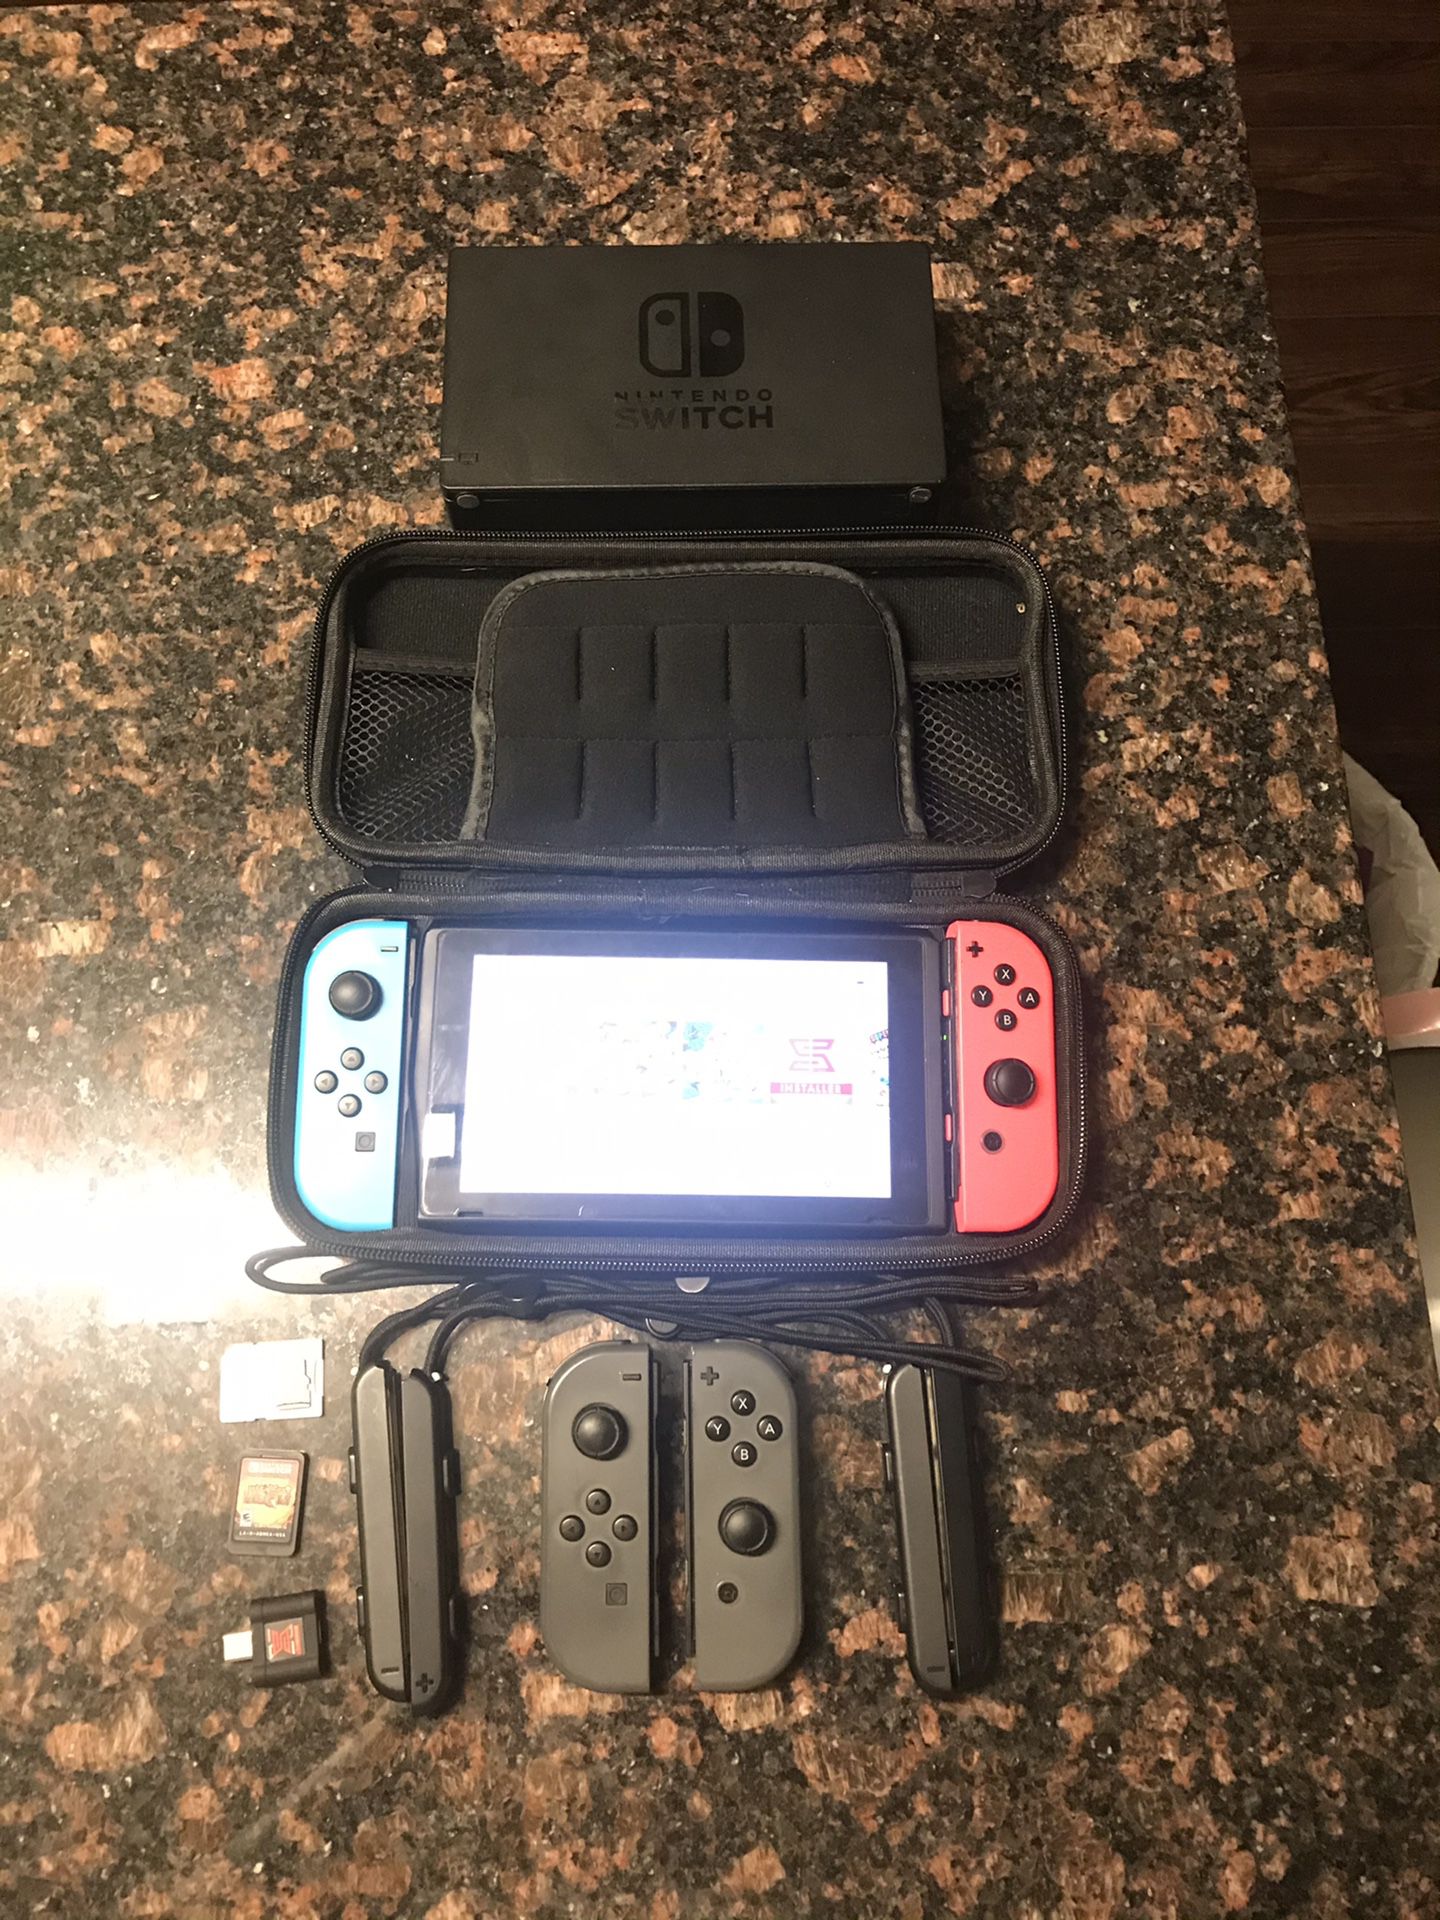 Nintendo Switch 4 controllers, sxOS, over 10 games (Mario Party, Odyssey, Cart, Arms, Mortal kombat and more , SD cards (128GB and 64GB)